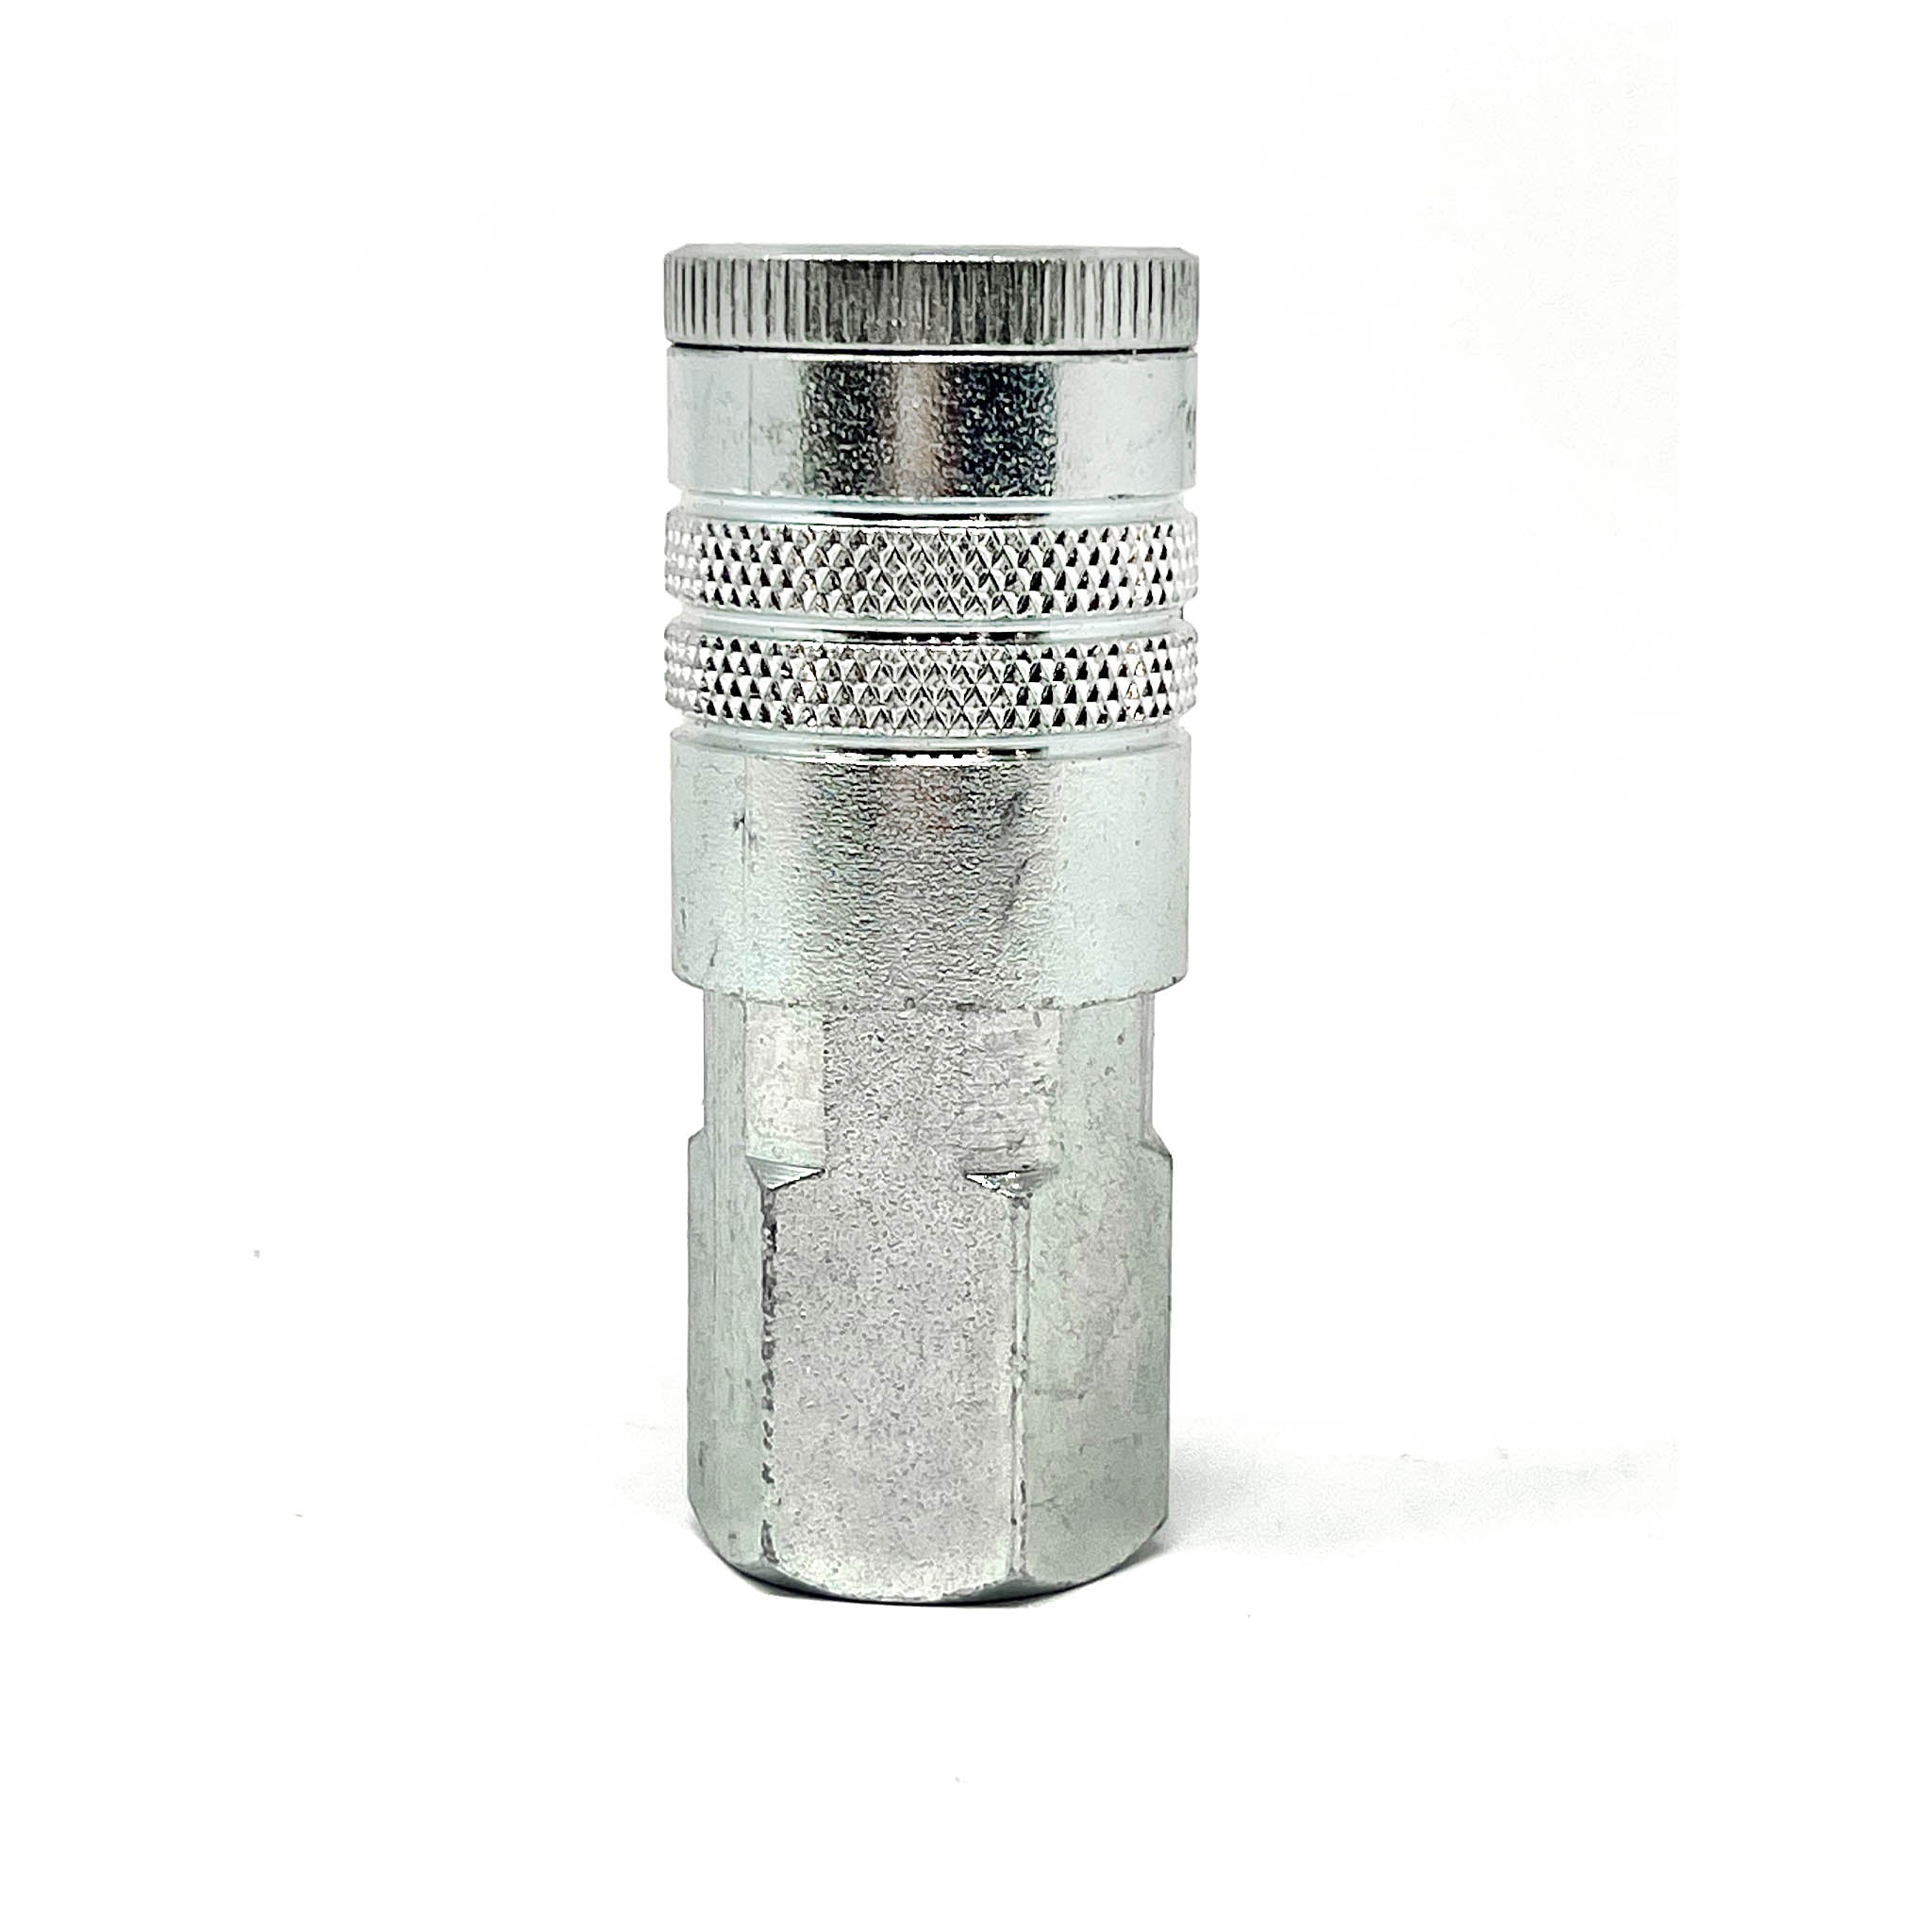 Air Coupler Fitting - G-Style, 1/2" FNPT